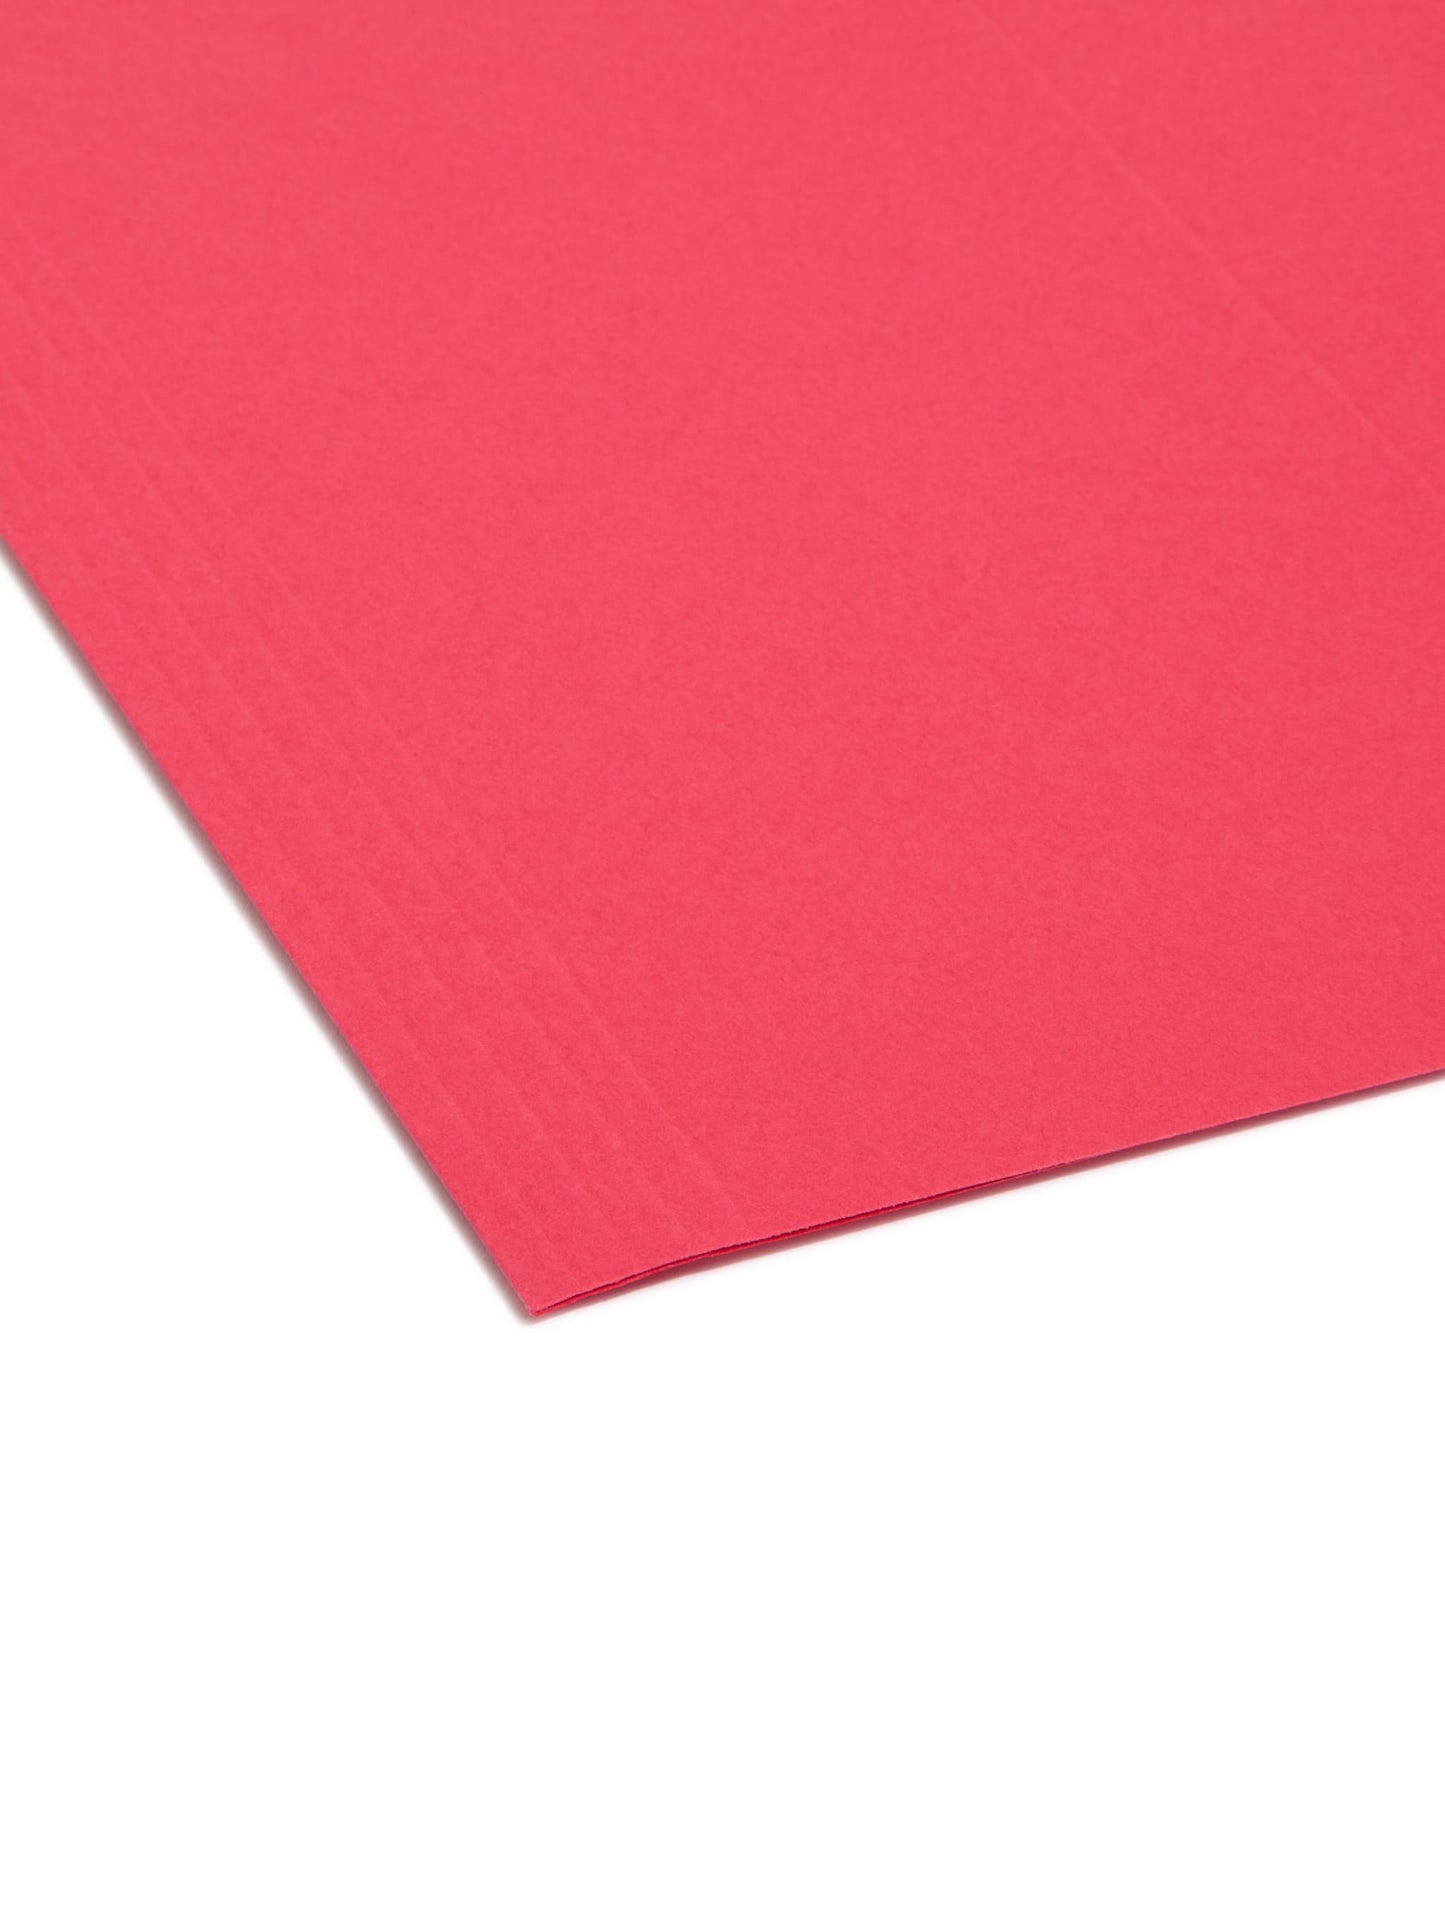 Standard Hanging File Folders with 1/5-Cut Tabs, Red Color, Legal Size, Set of 25, 086486641678